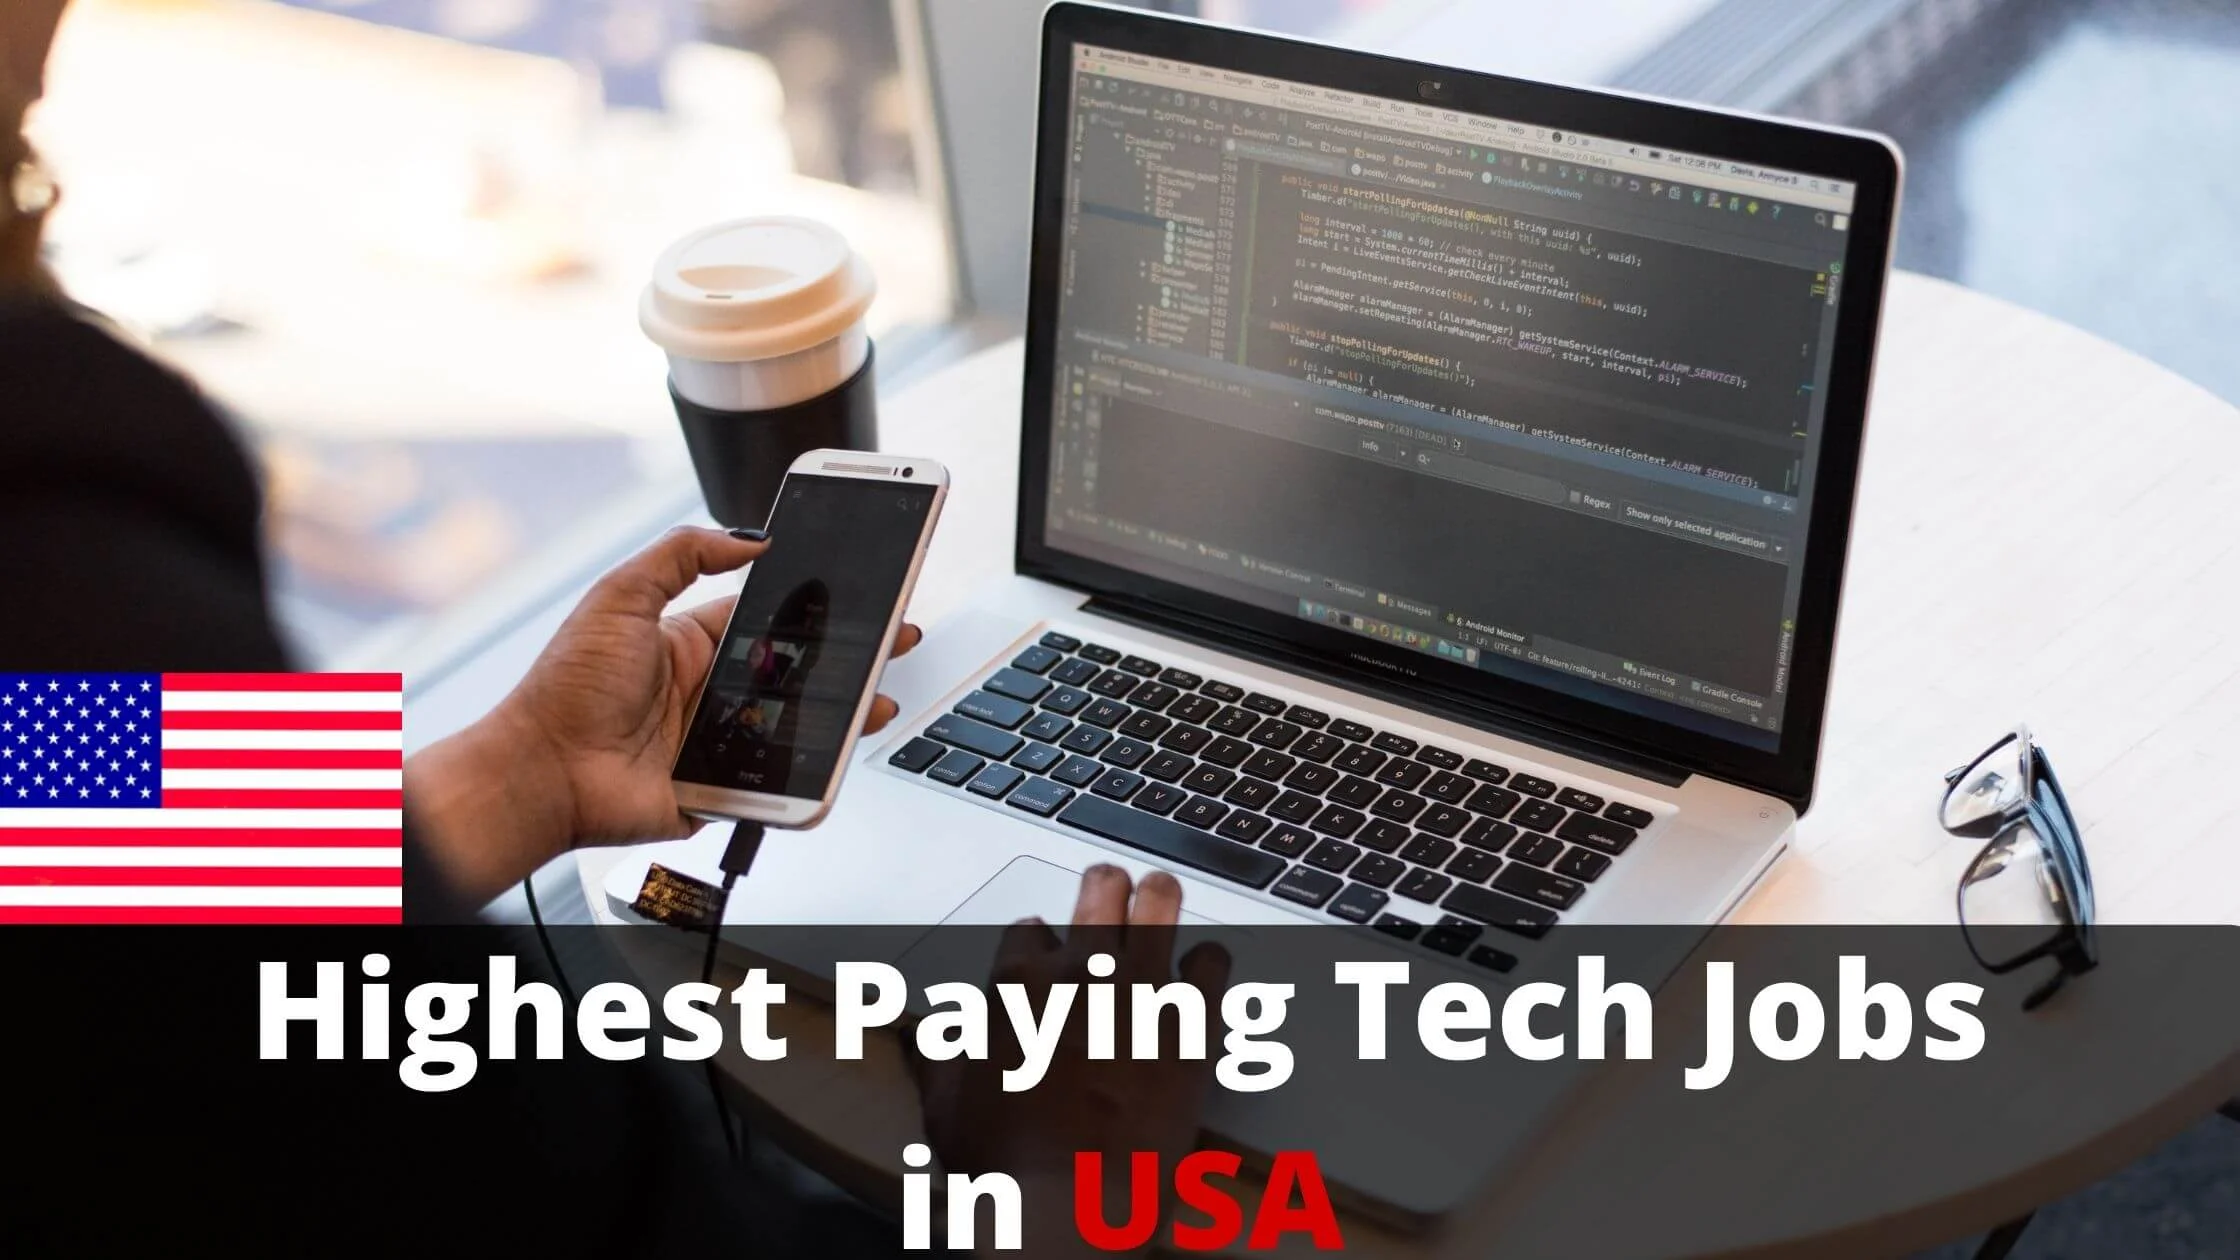 Highest Paying Tech Jobs in USA